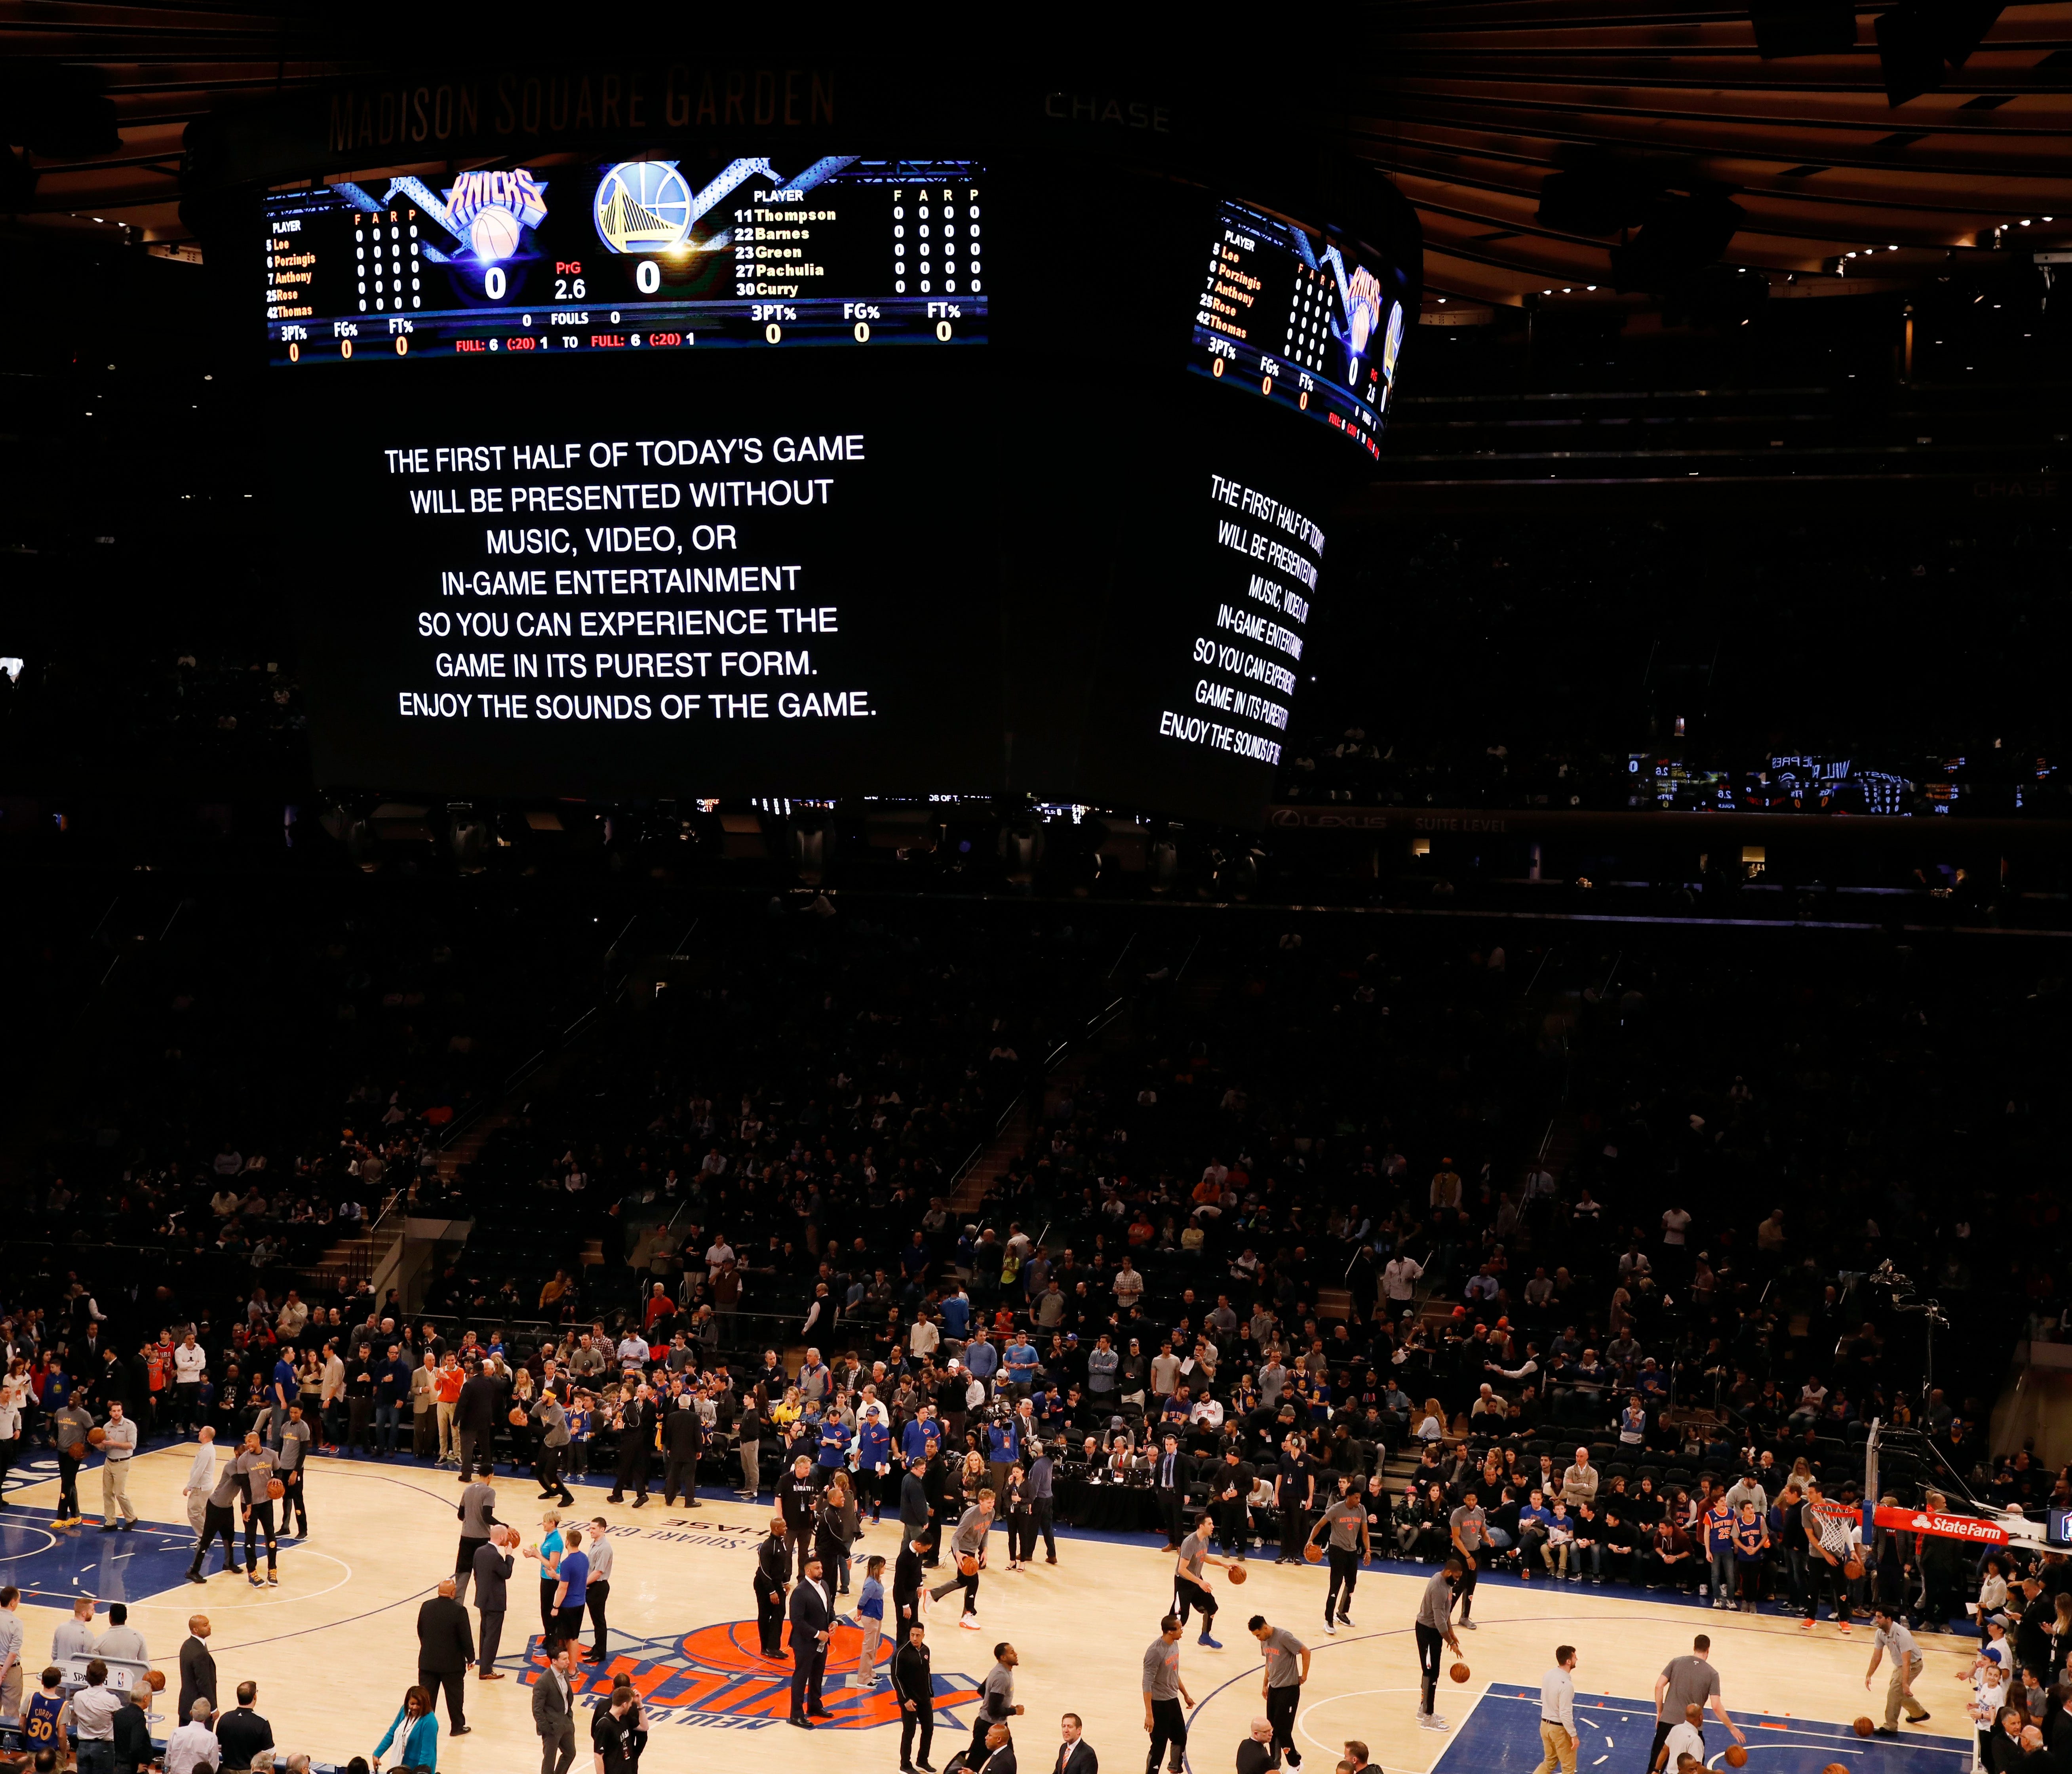 epa05832196 A general view of Madison Square Garden before the start of  the first half of the NBA basketball game between the Golden State Warriors and the New York Knicks at Madison Square Garden in New York, New York, USA, 05 March 2017.  EPA/JASO